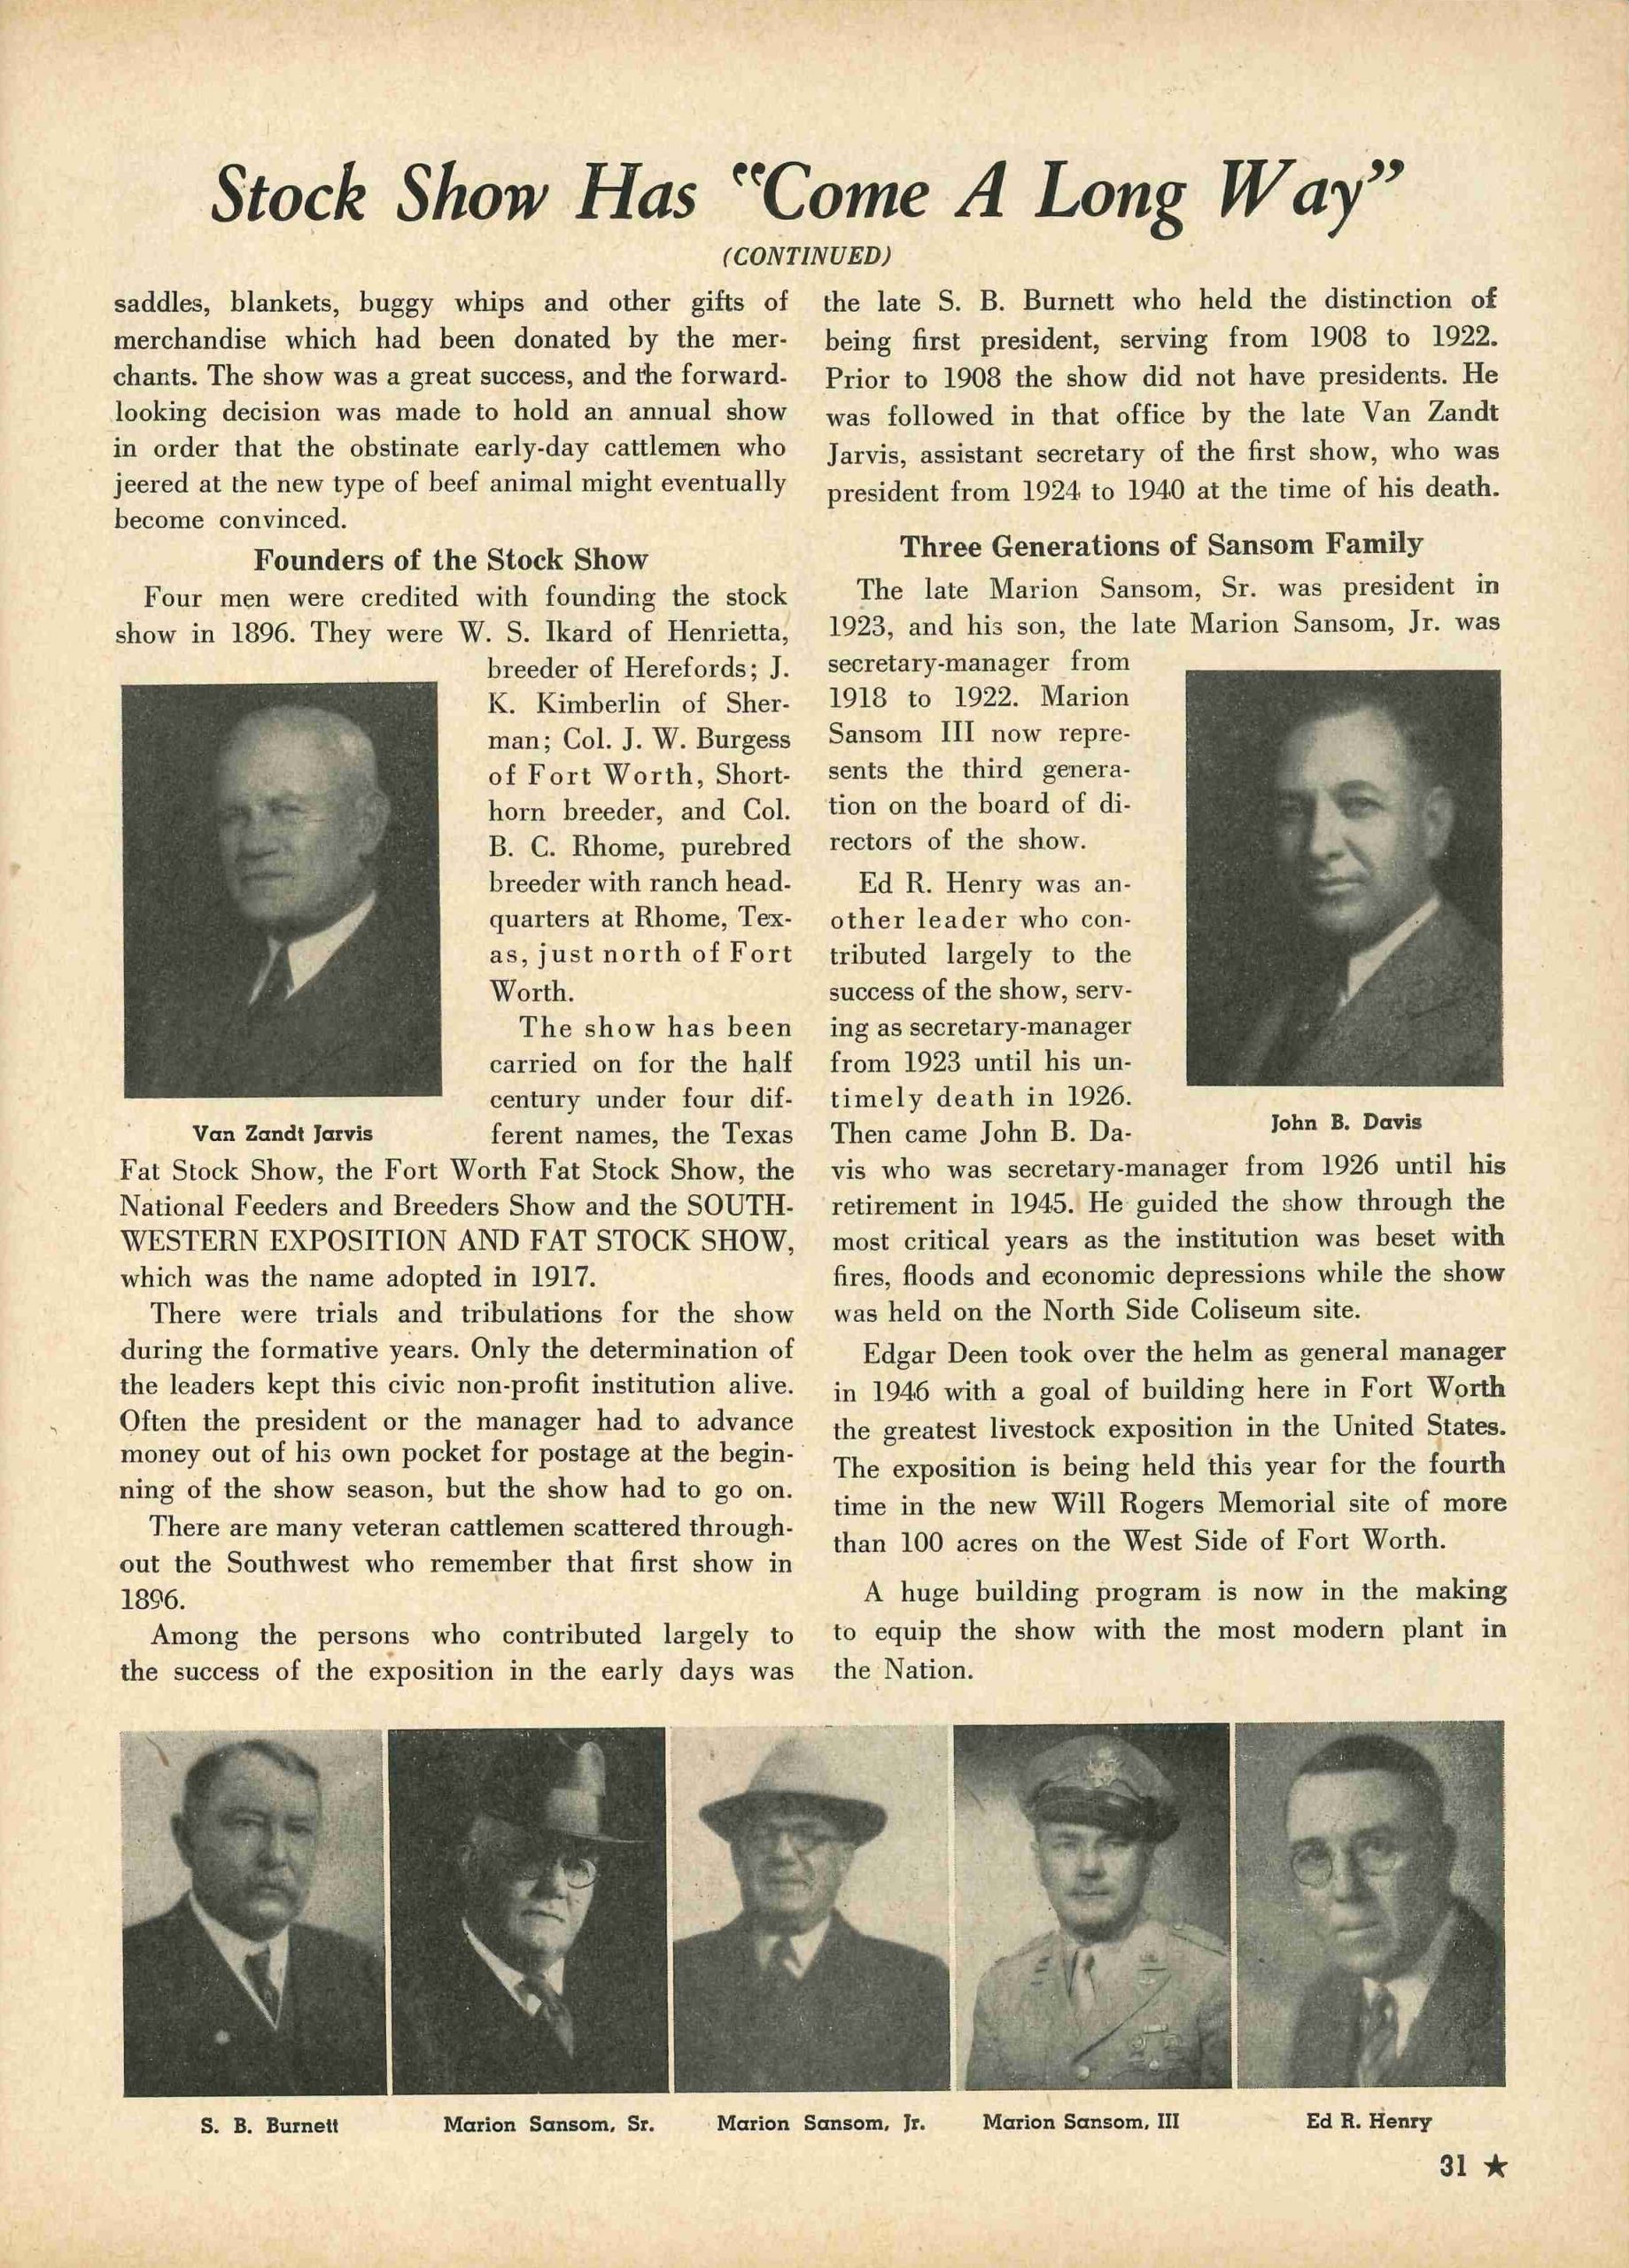 Third page of essay from stock show annual about its history